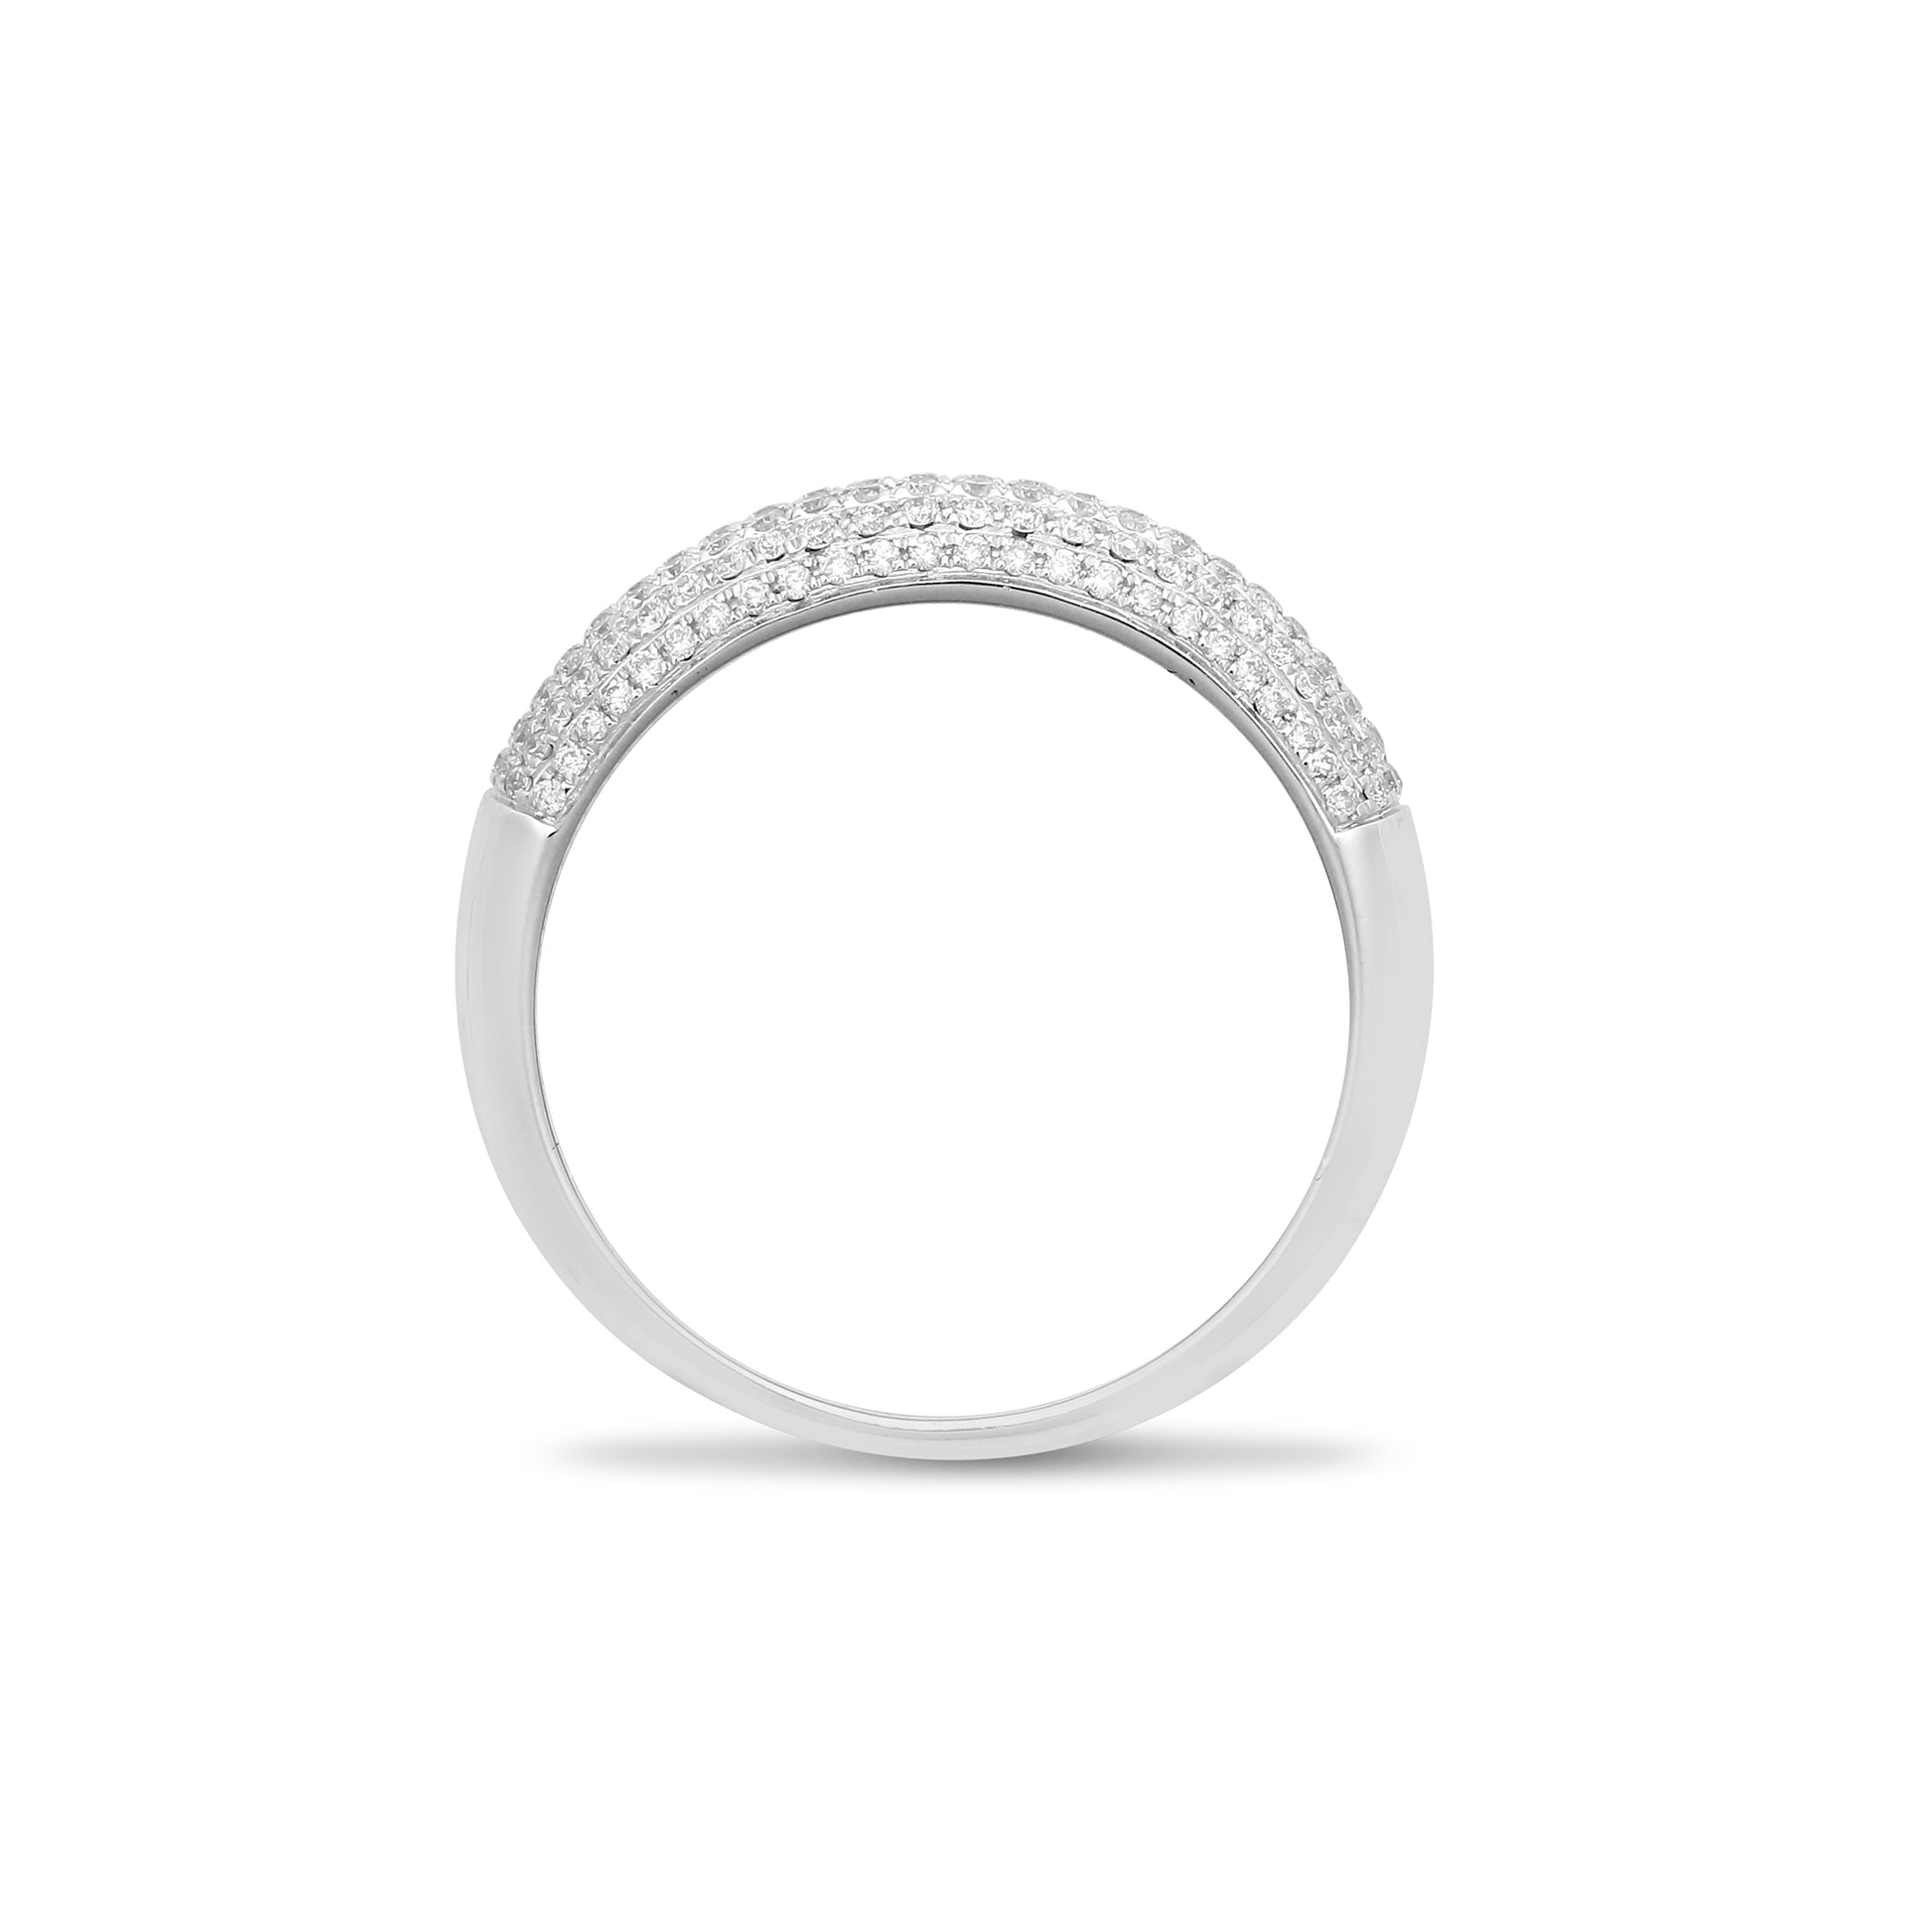 18ct White Gold  0.5ct Diamond Domed Bombe Eternity Ring 6mm - 18R903